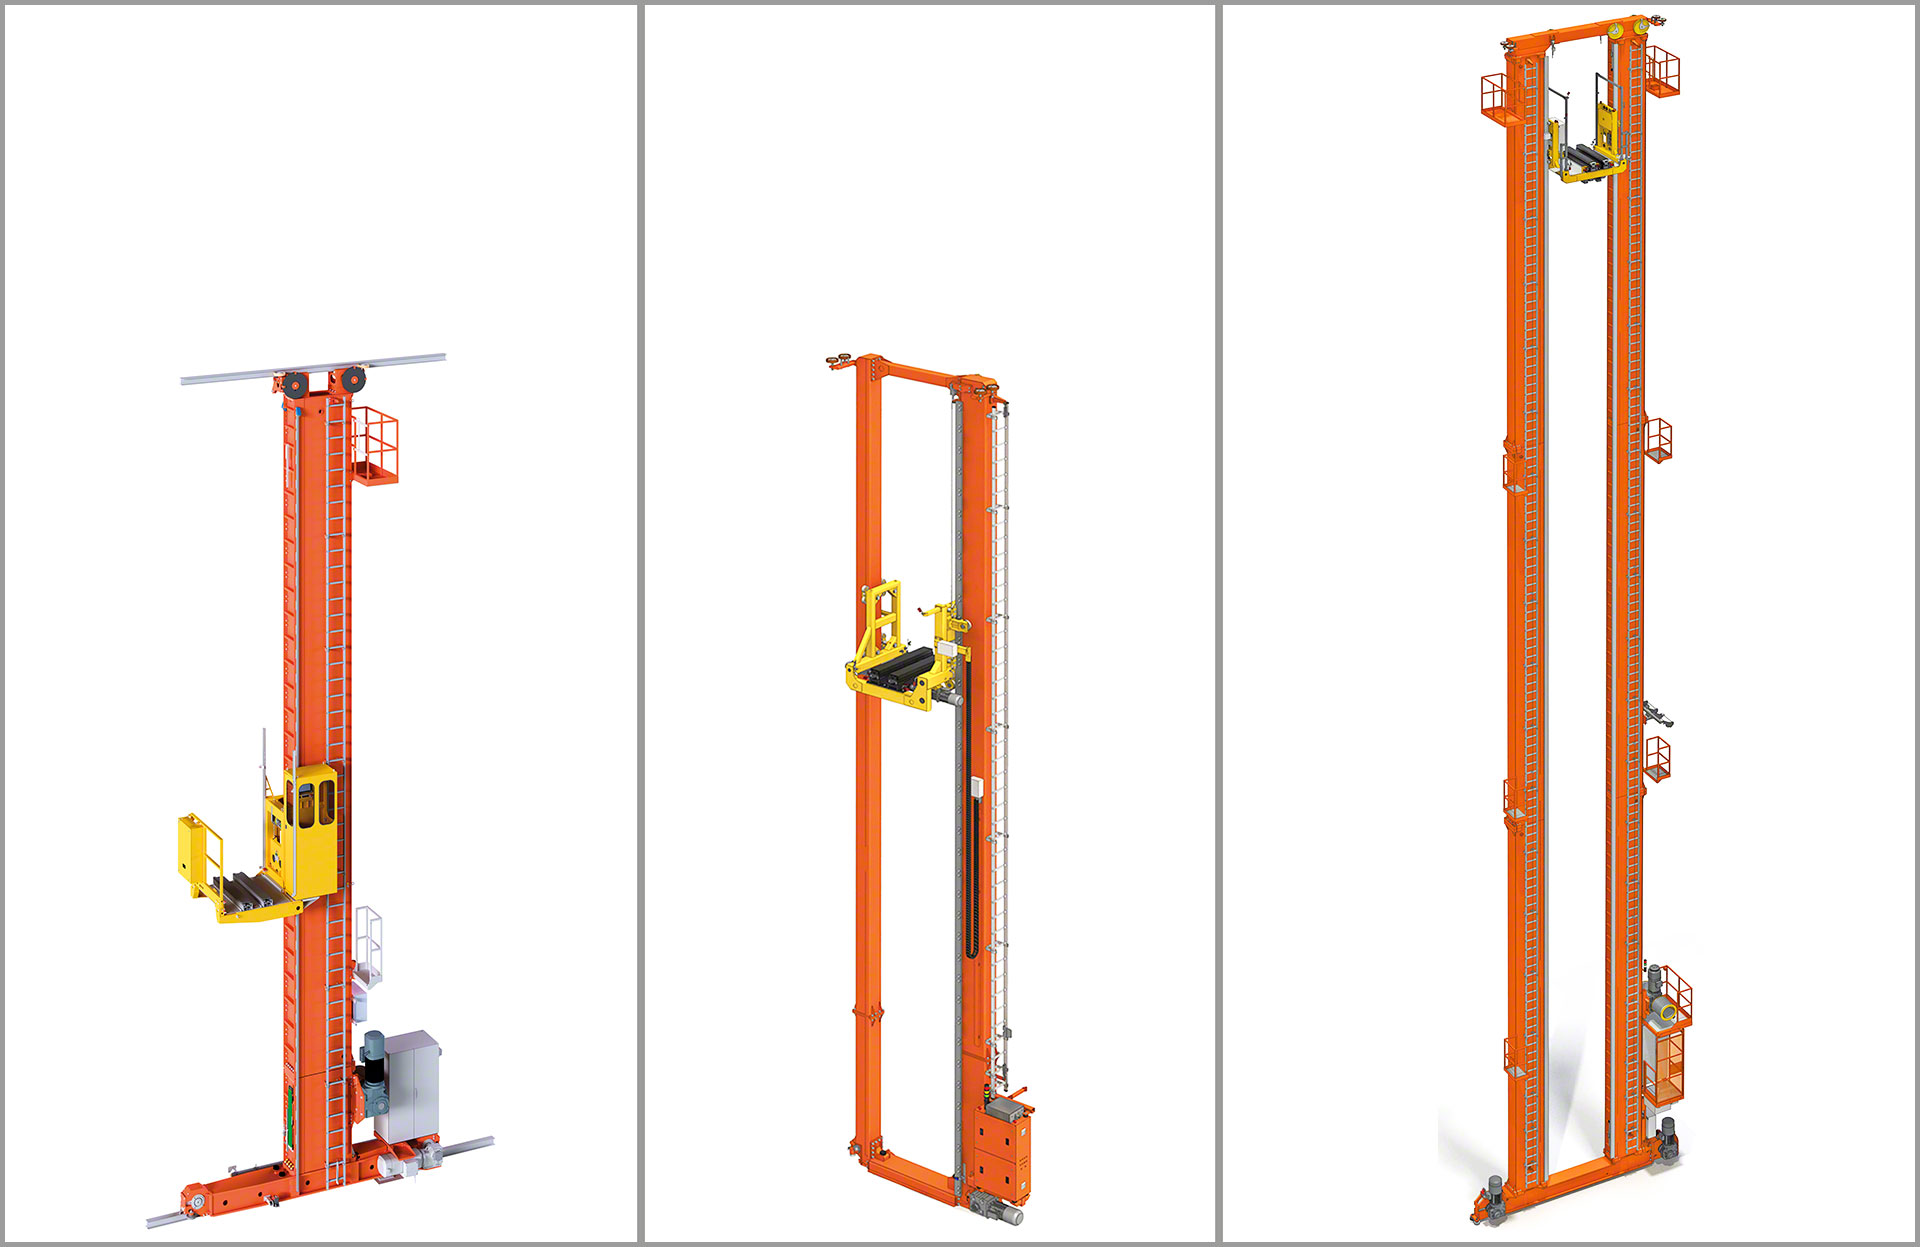 Mecalux features several stacker crane models tailored for multiple needs